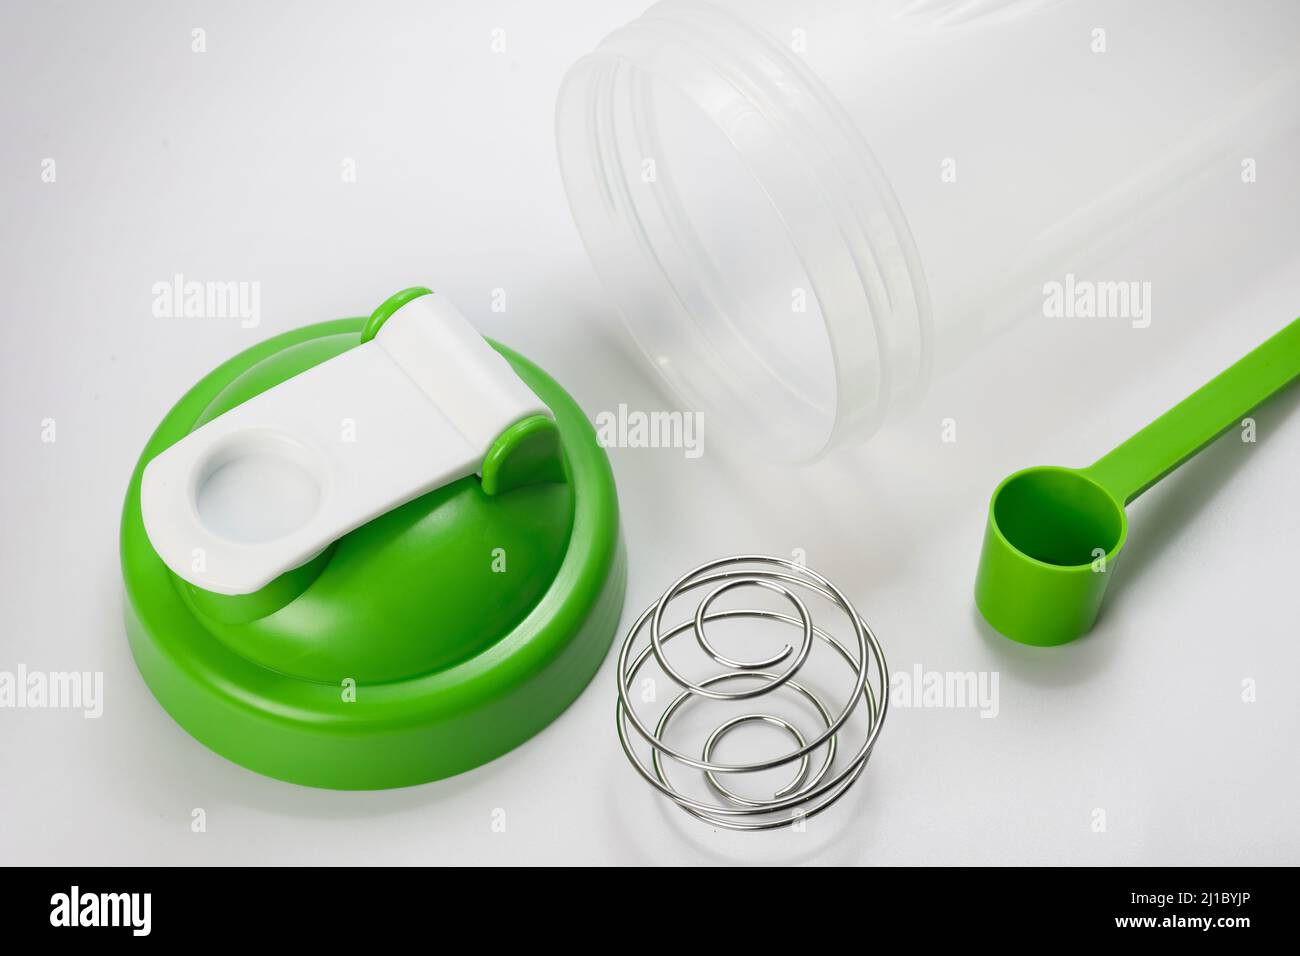 Plastic Bottle Of Protein Shake Mixer With Metal Shaker Spiral Spring Ball  To Blend Stock Photo - Download Image Now - iStock